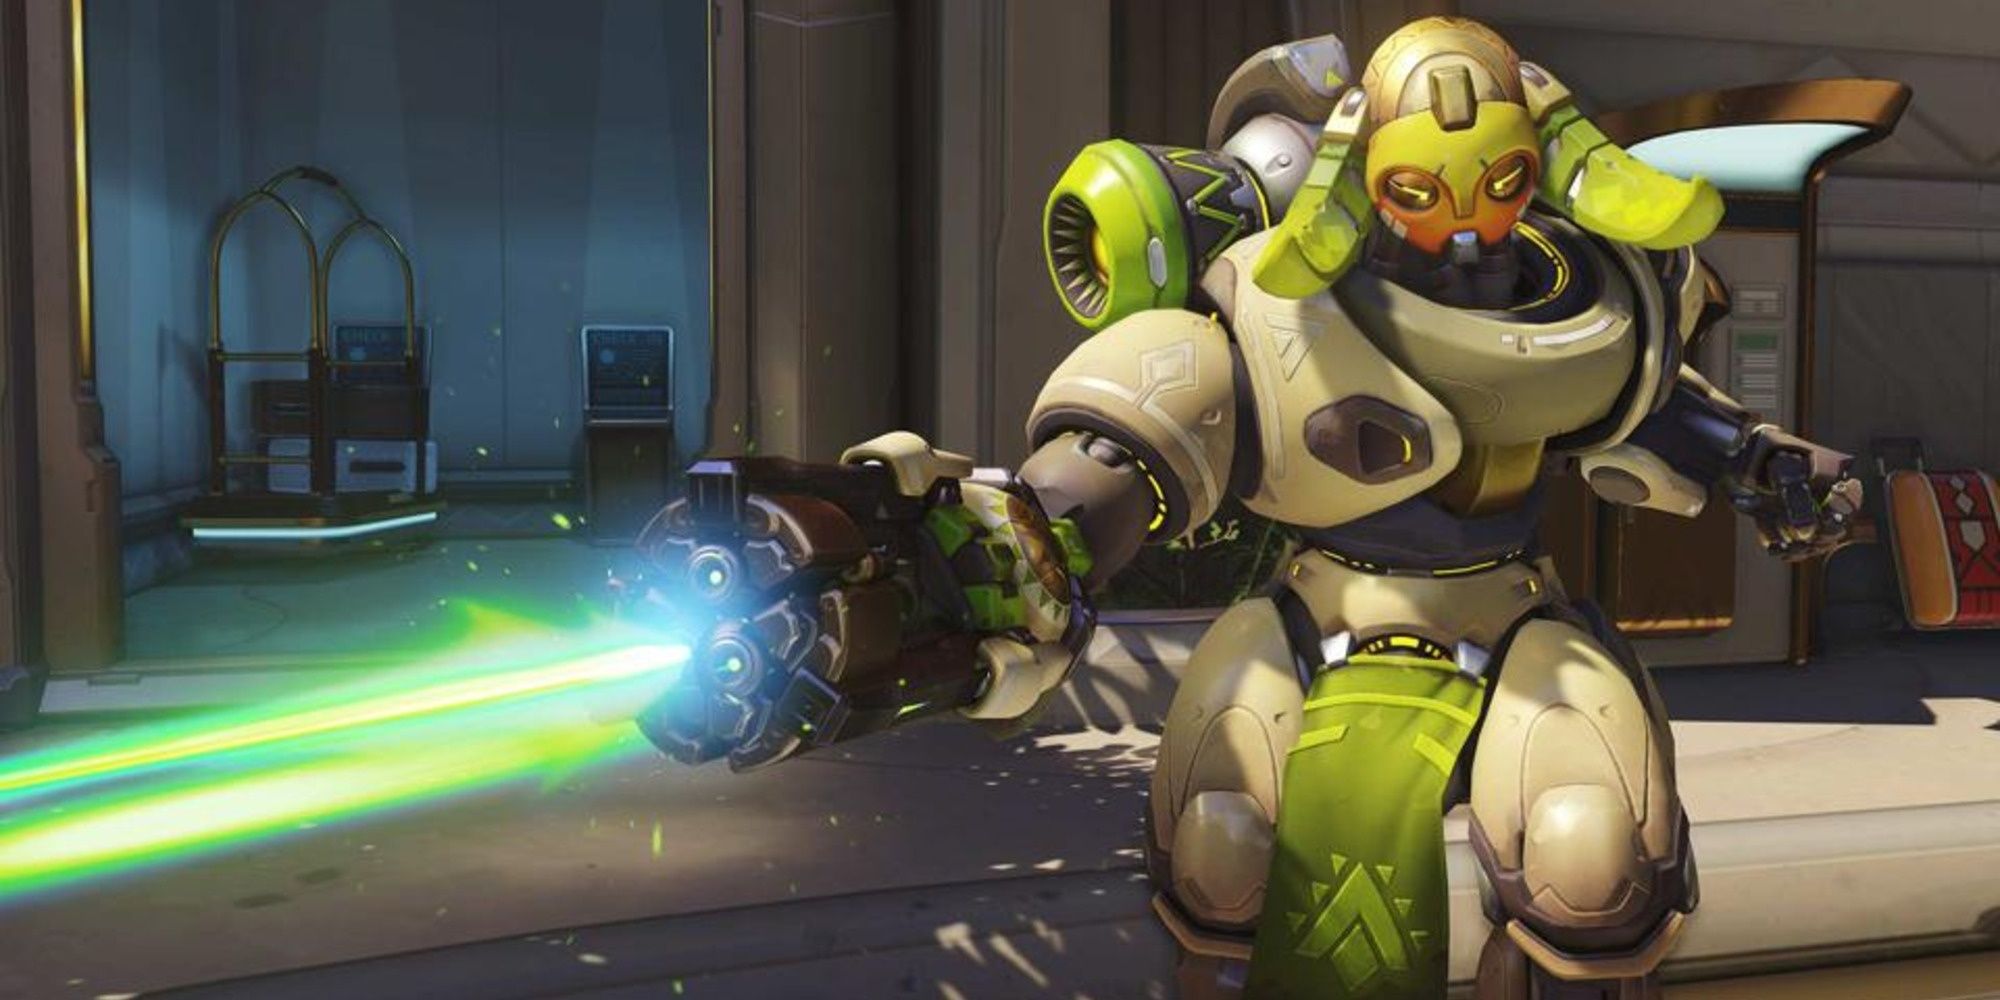 Orisa from Overwatch firing her Augmented Fusion Driver.